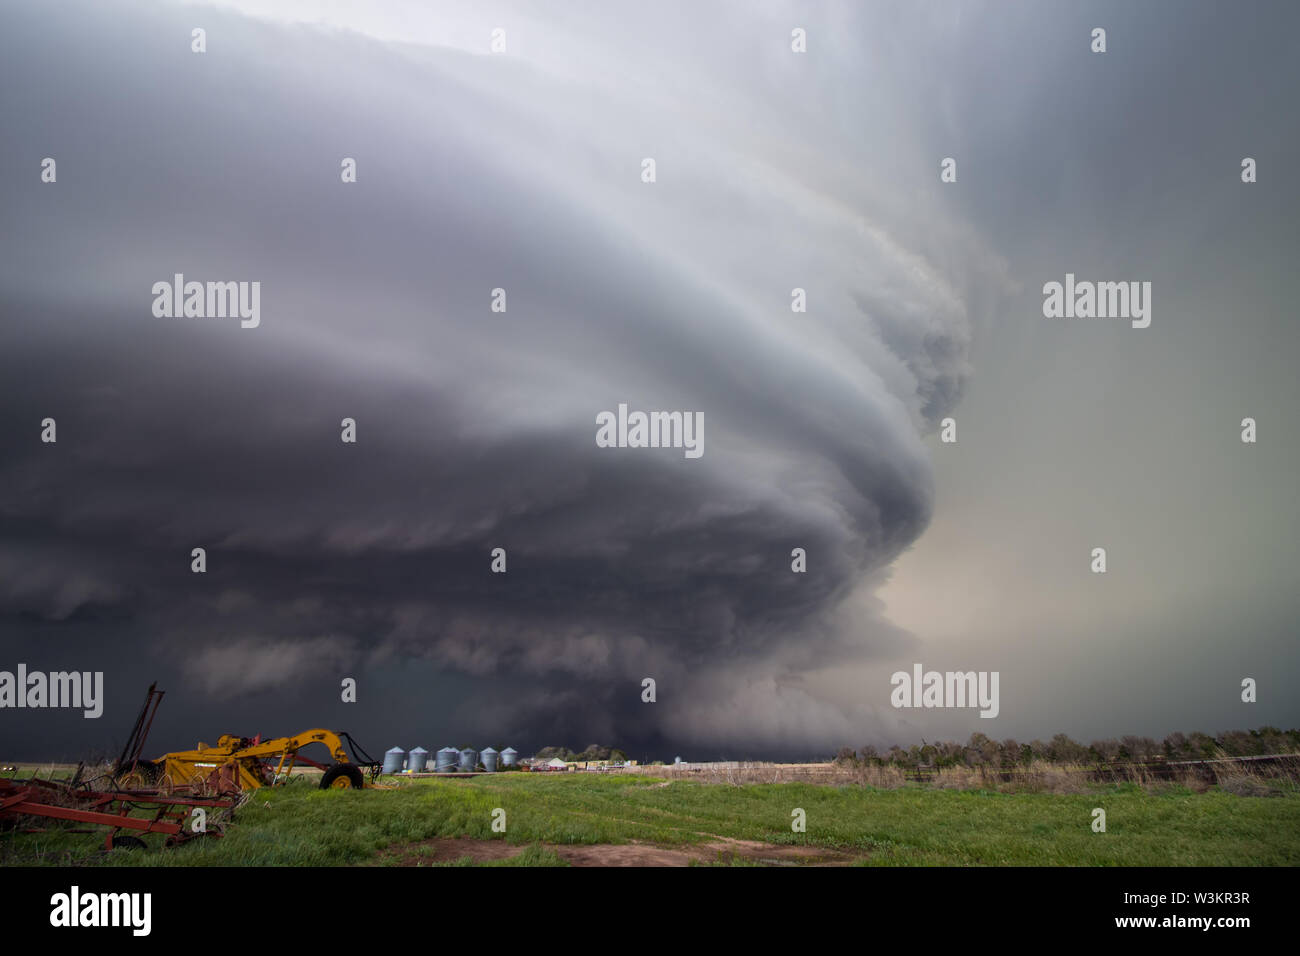 A huge supercell storm with a ground scraping wall cloud fills the sky over Nebraska farmland. Stock Photo